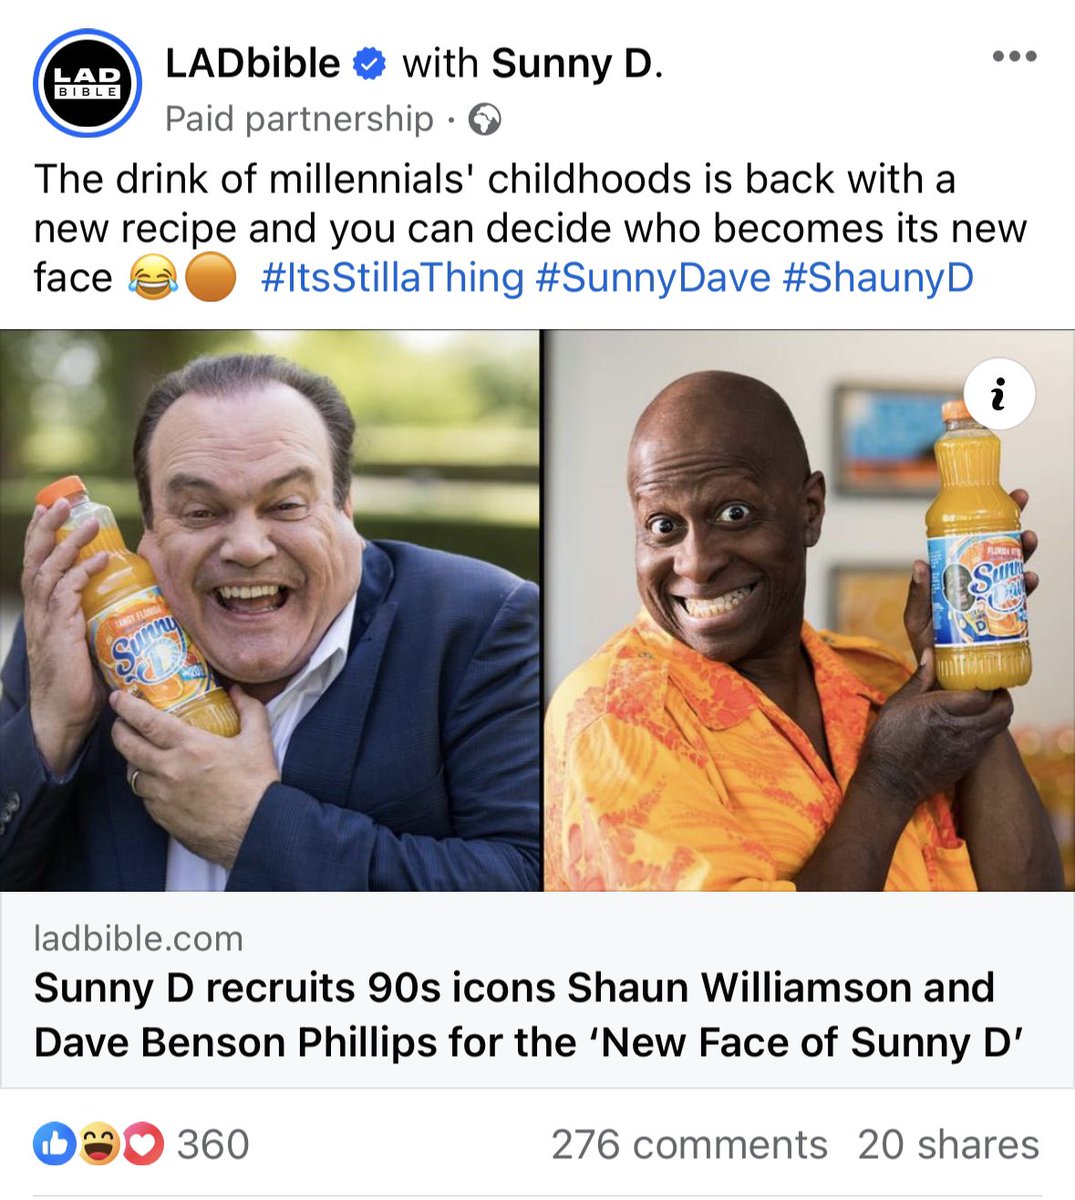 It’s cool to see our Sunny D campaign in LADbible! Seeing Els from our team directing a topless Shaun Williamson was something I’ll never forget. Well done to all team Knowlton involved! #marketing #sunnyd #shaunyd #sunnydave